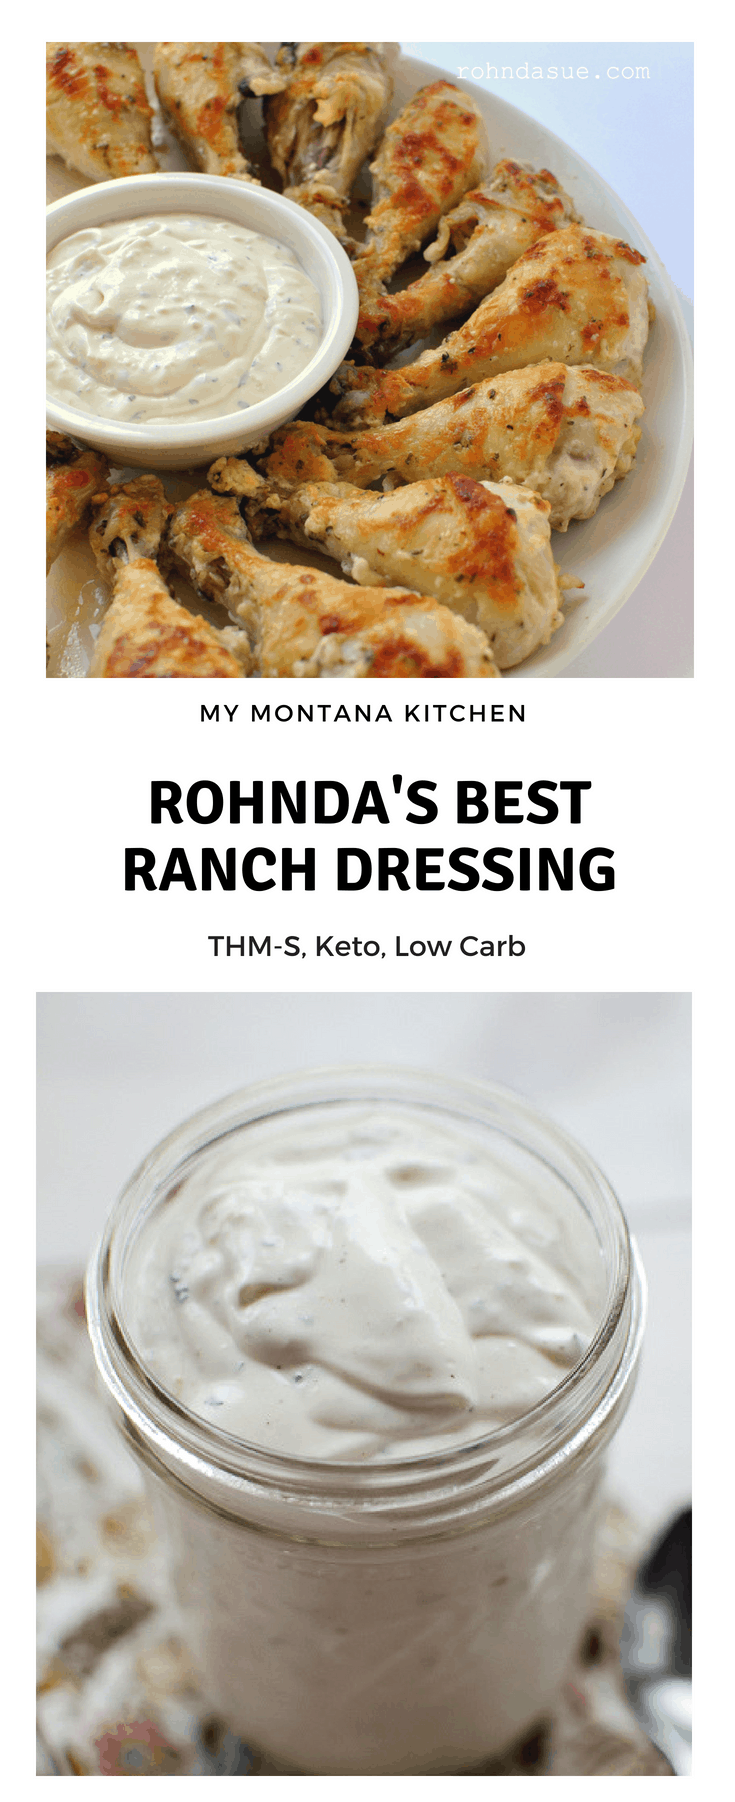 This is the Best Ranch Dressing, hands down. Rich, creamy, and full of tangy ranch flavor, this homemade ranch is the perfect low carb dressing for your salad. Or use it to dip wings, pizza, pickles, or vegetables. #trimhealthymama #rohndasranch #homeamderanchdressing #homemadedressing #keto #lowcarb